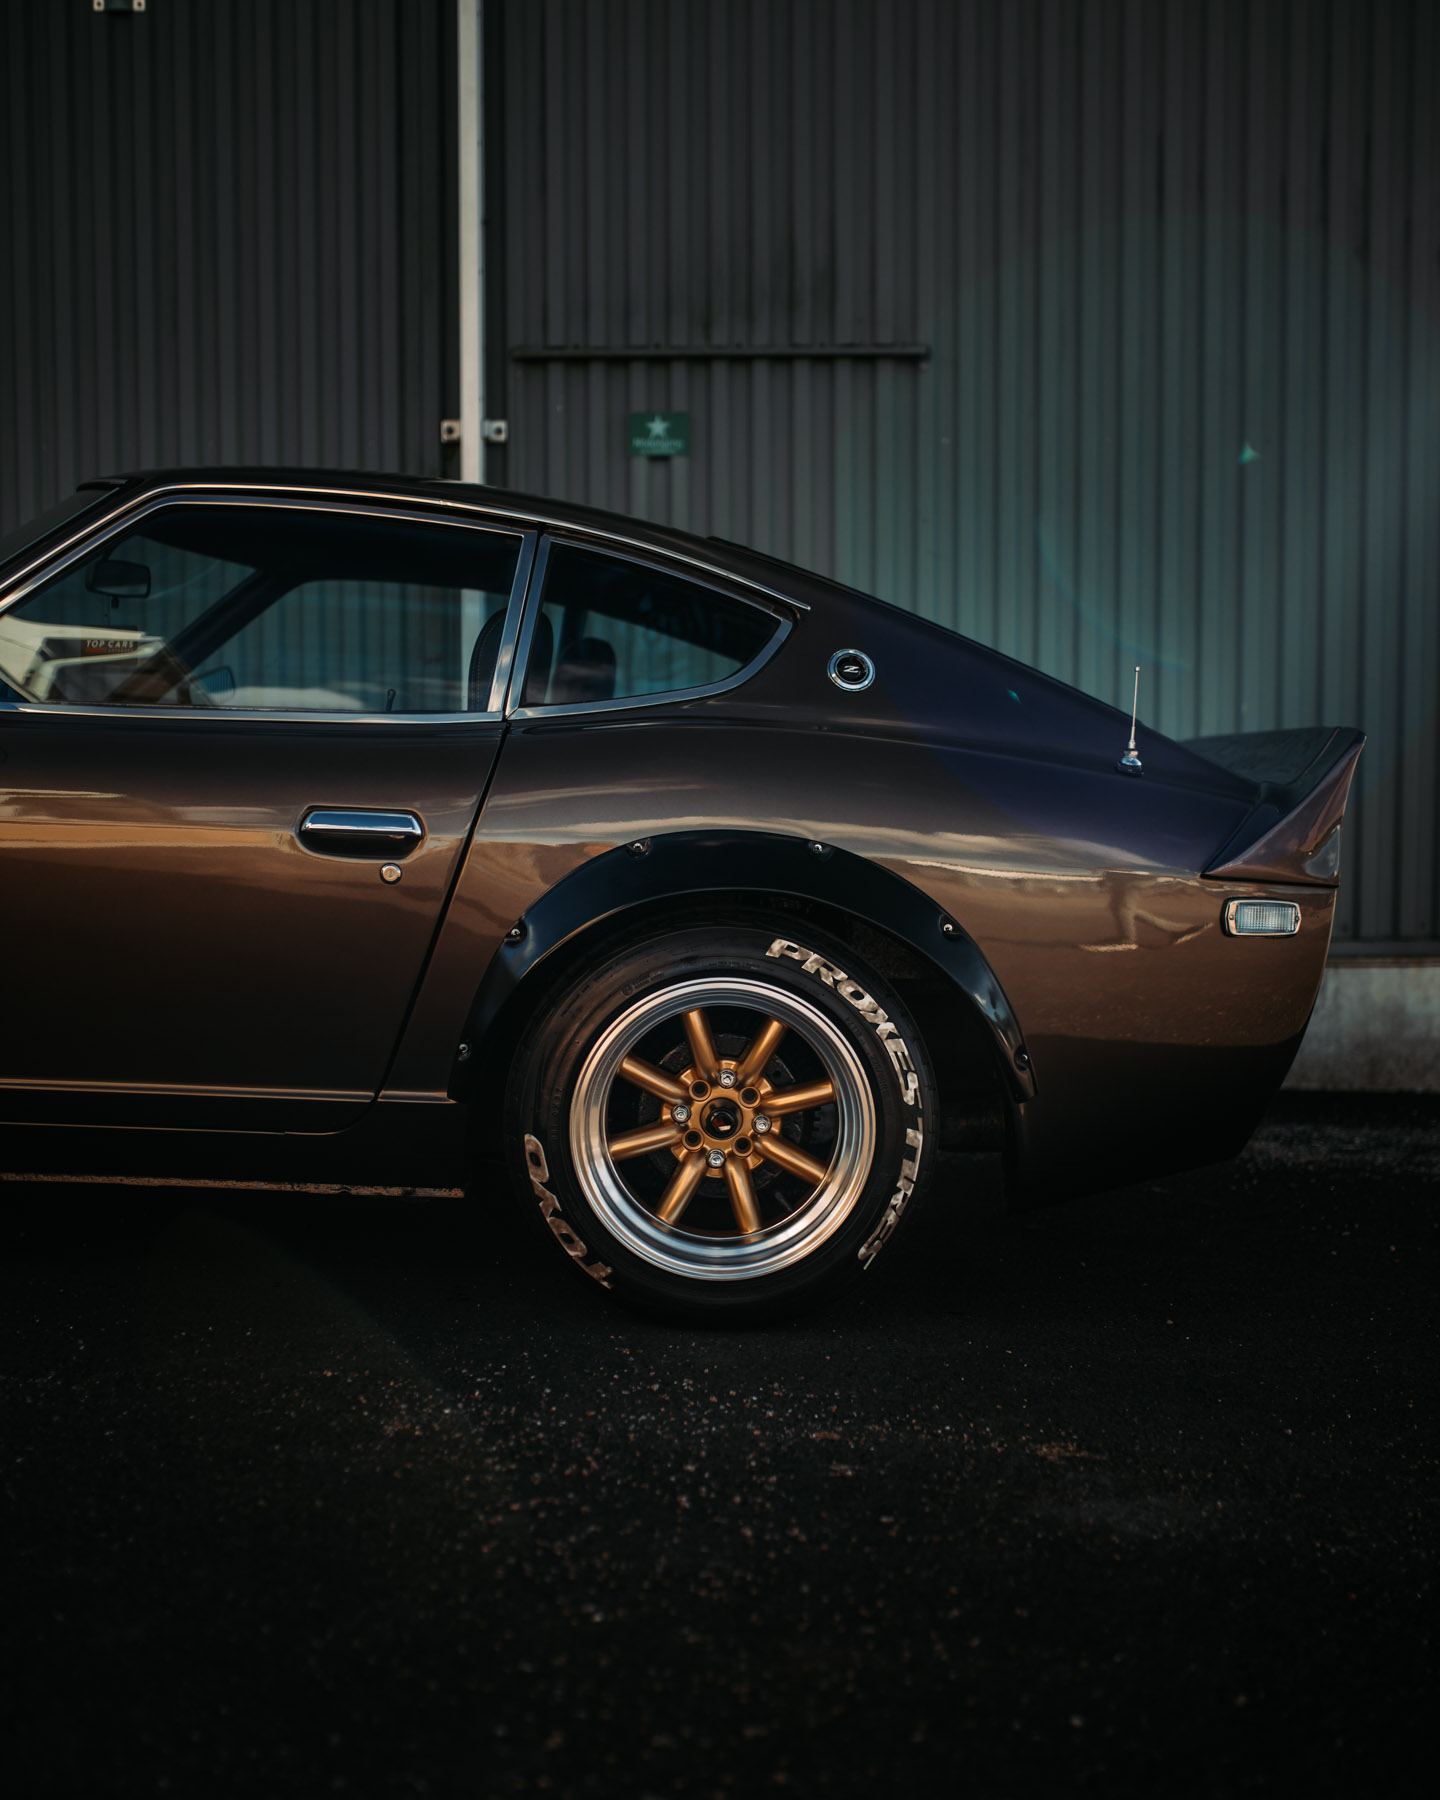 professional automotive photographer Matiss Neimans based in Gothenburg Sweden, available for bookings worldwide